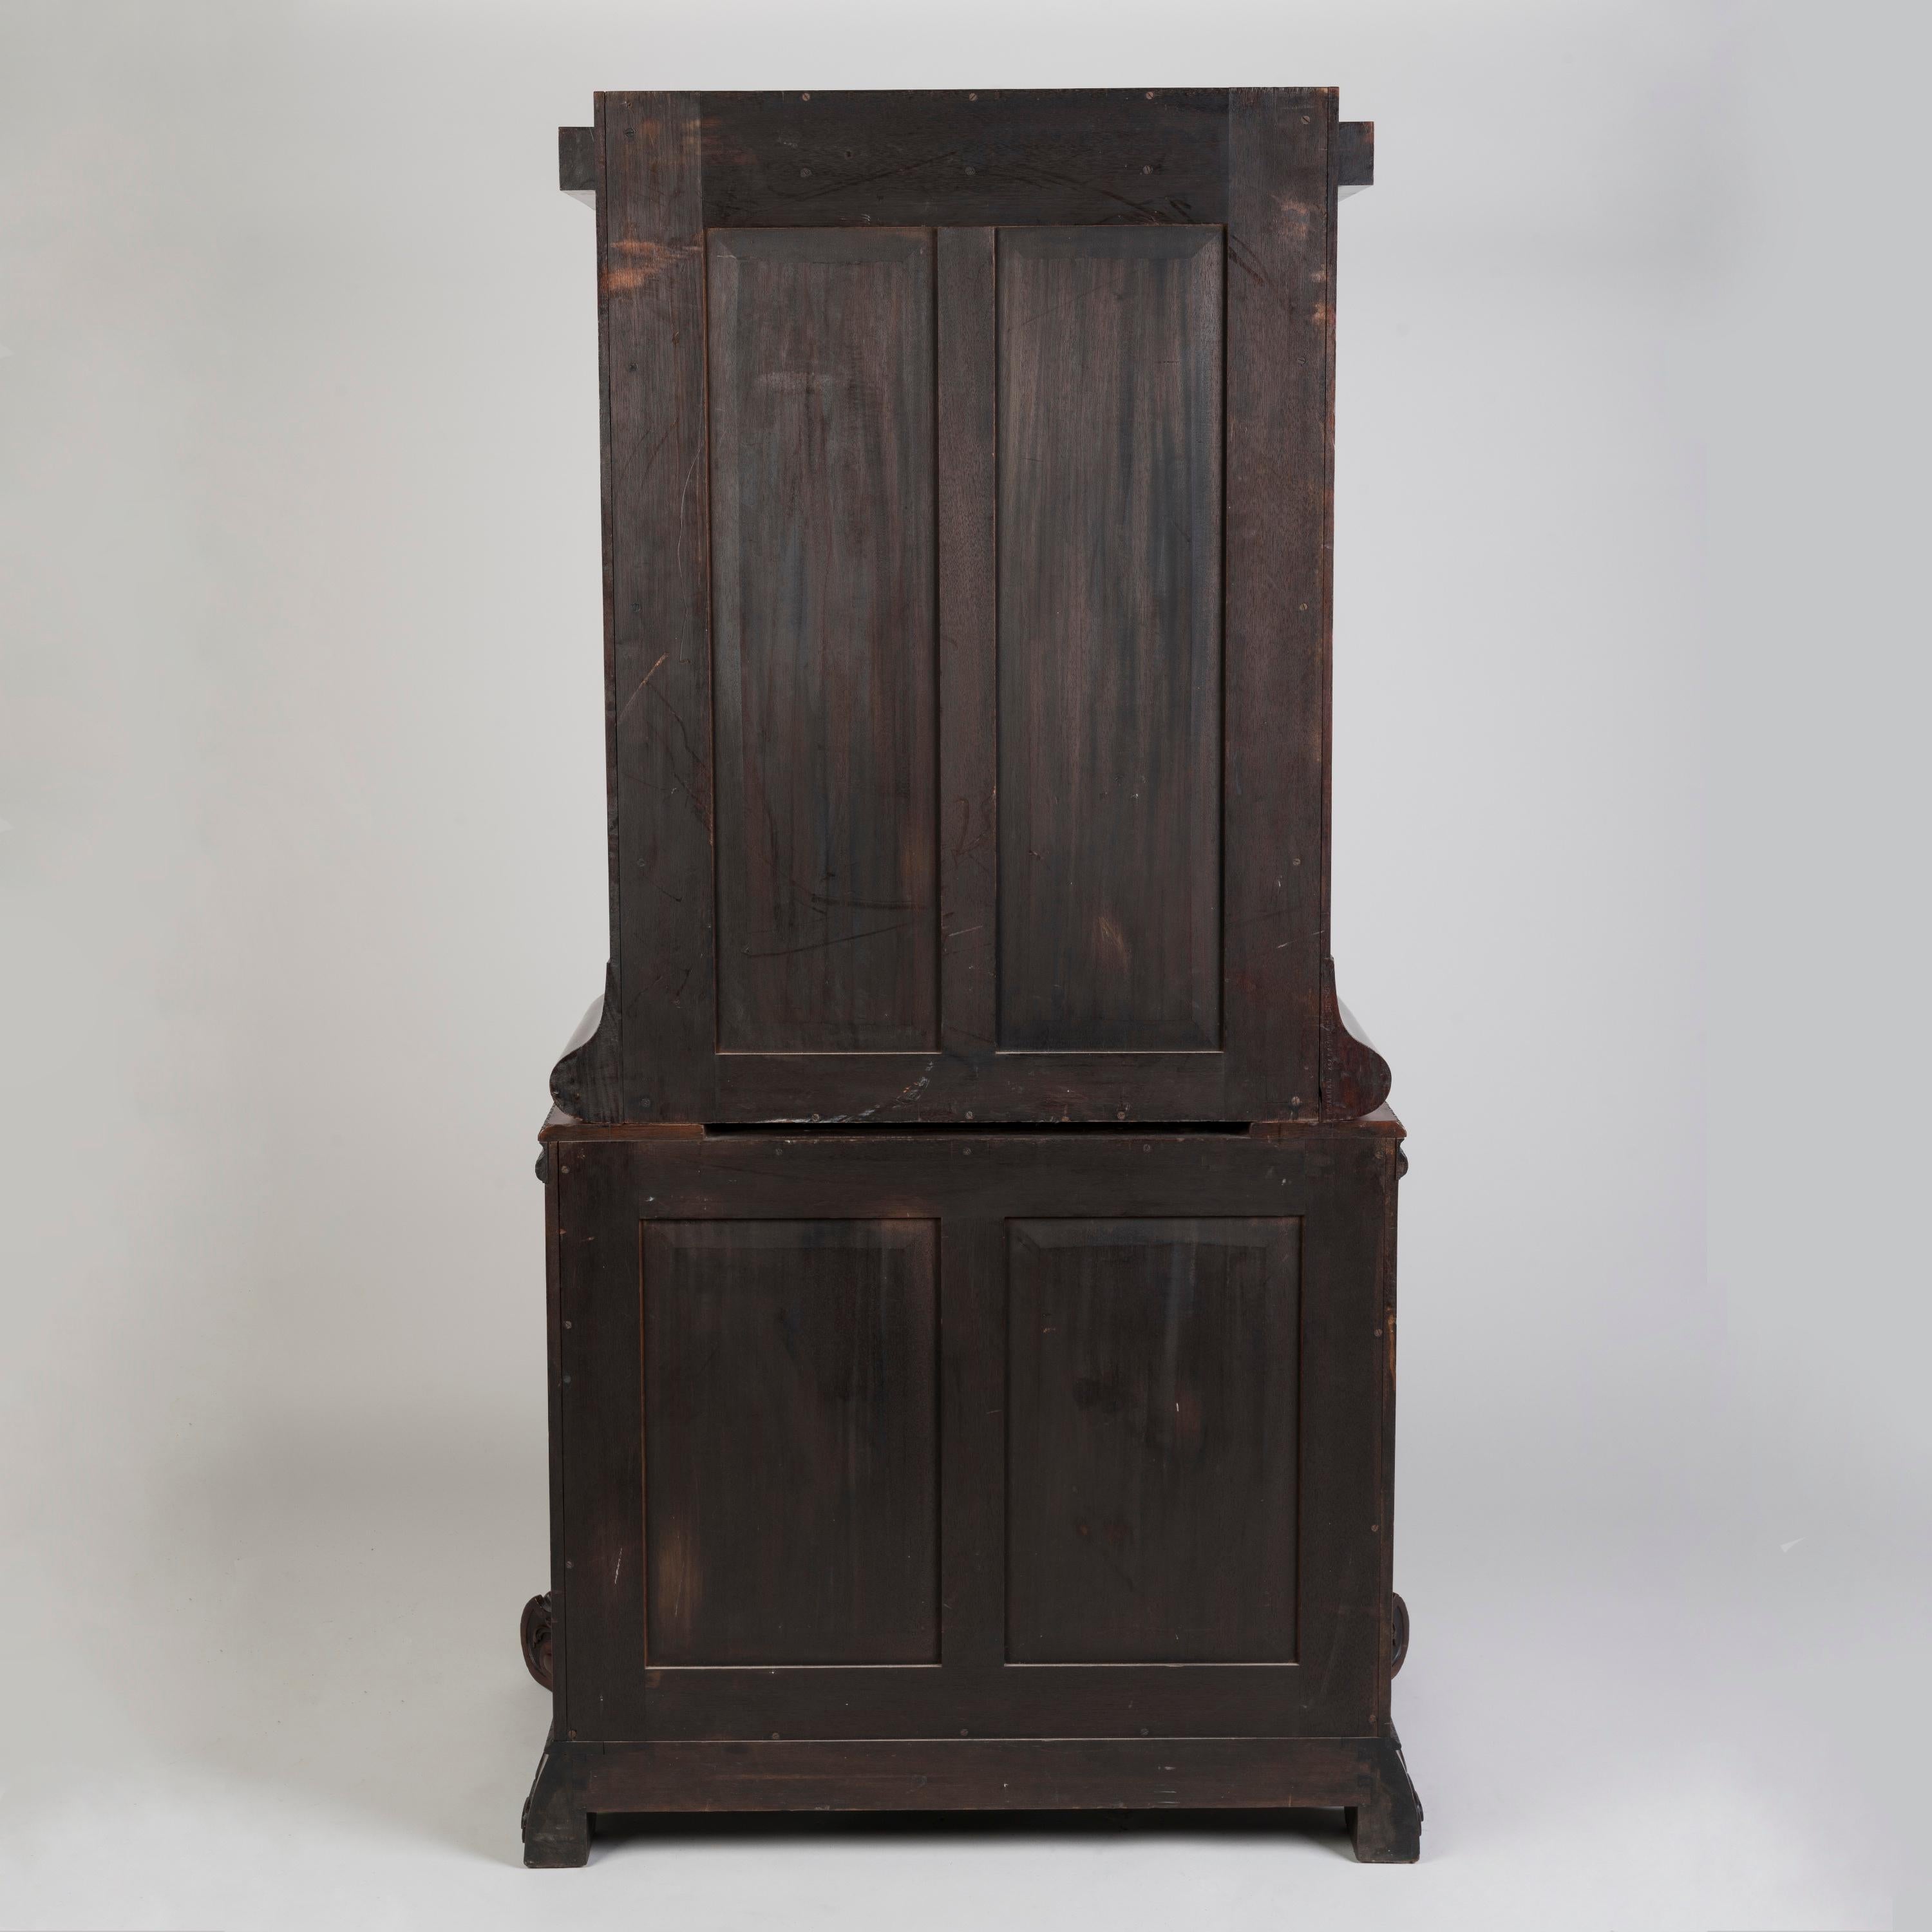 19th Century Carved Mahogany Cabinet Bookcase by H. Samuel in the Georgian Style For Sale 3